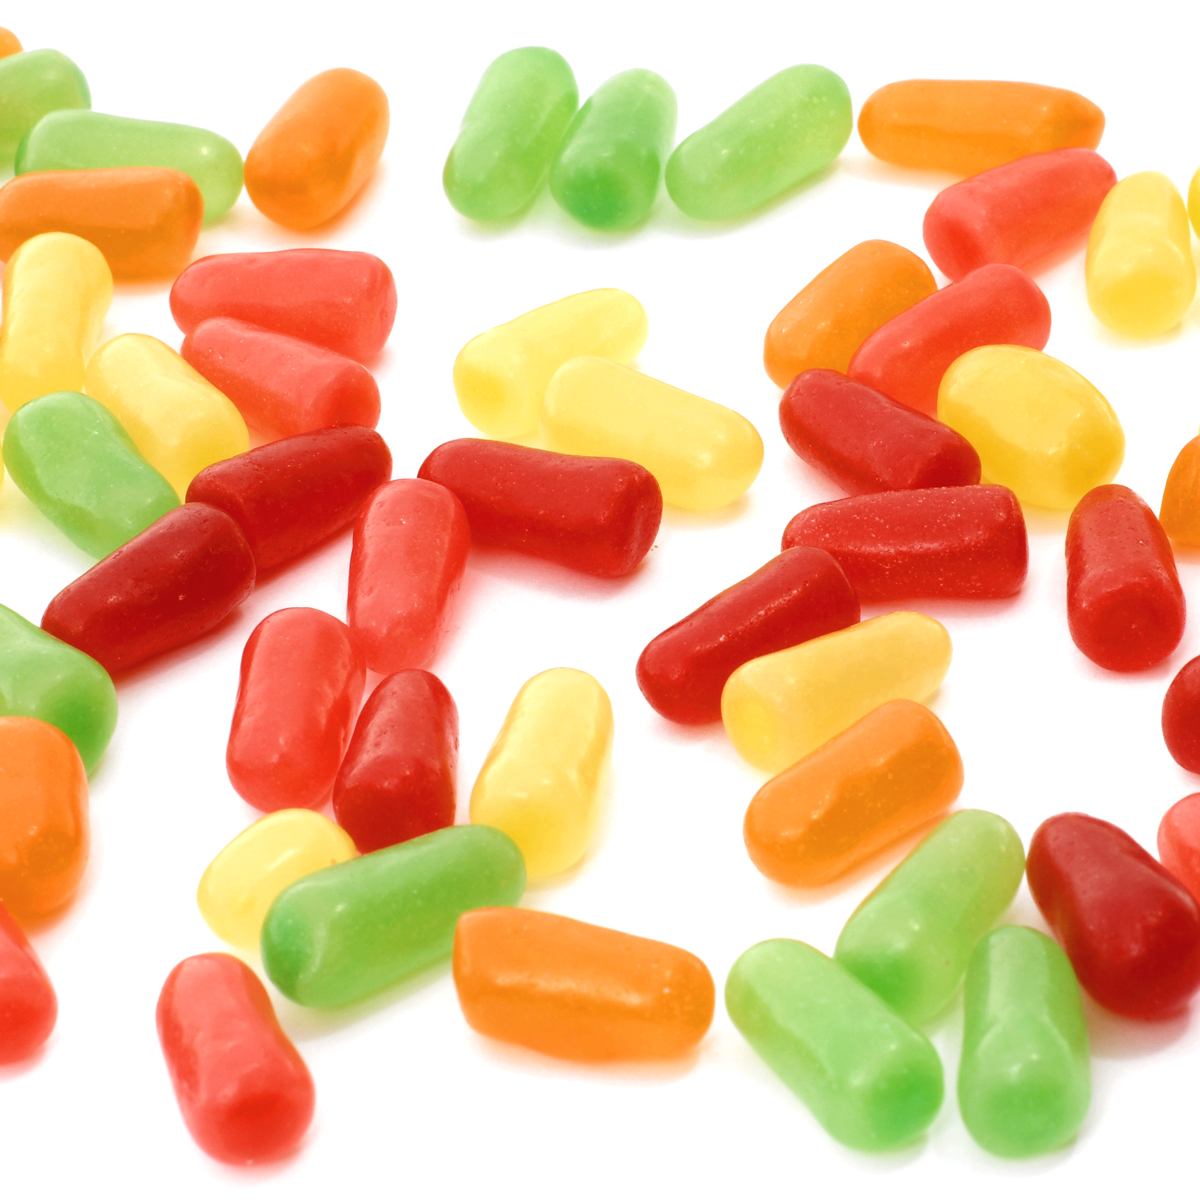 MIKE AND IKE